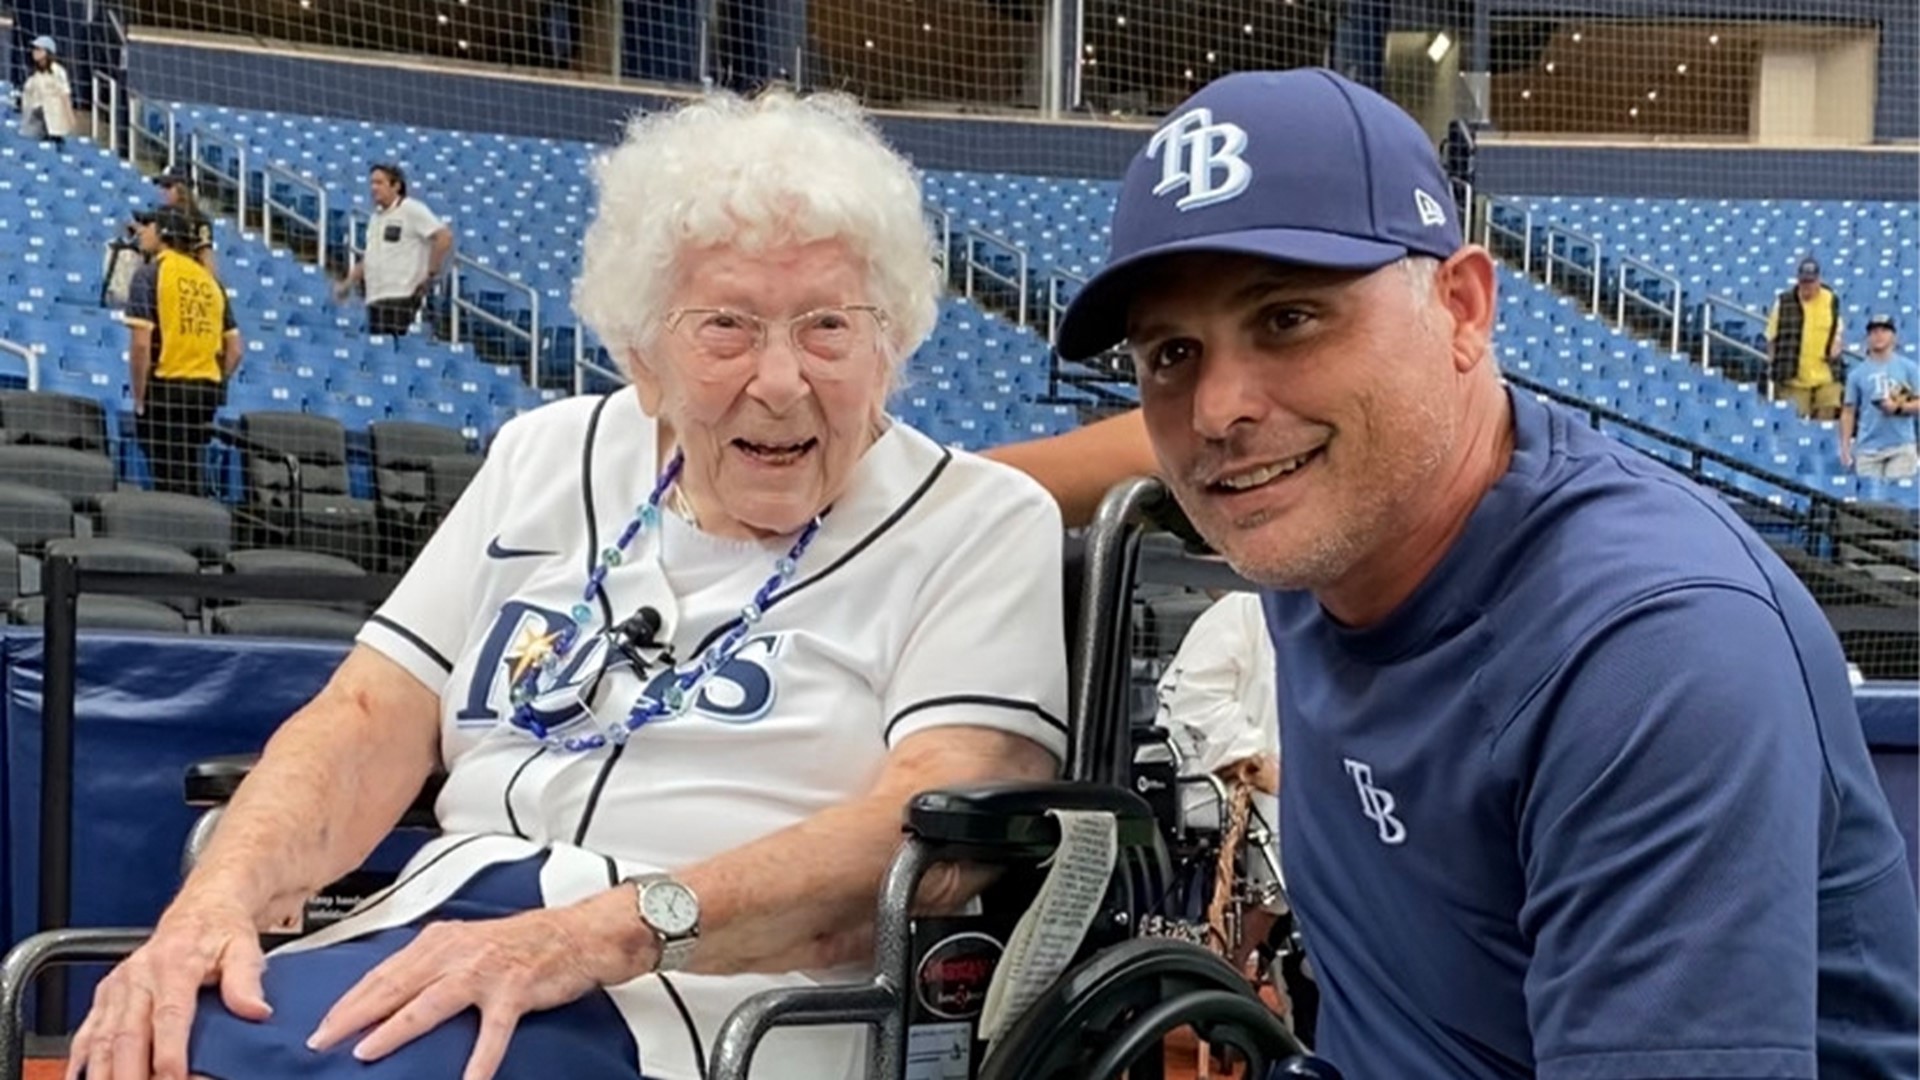 106-year-old Rays fan watches winner at Tropicana Field